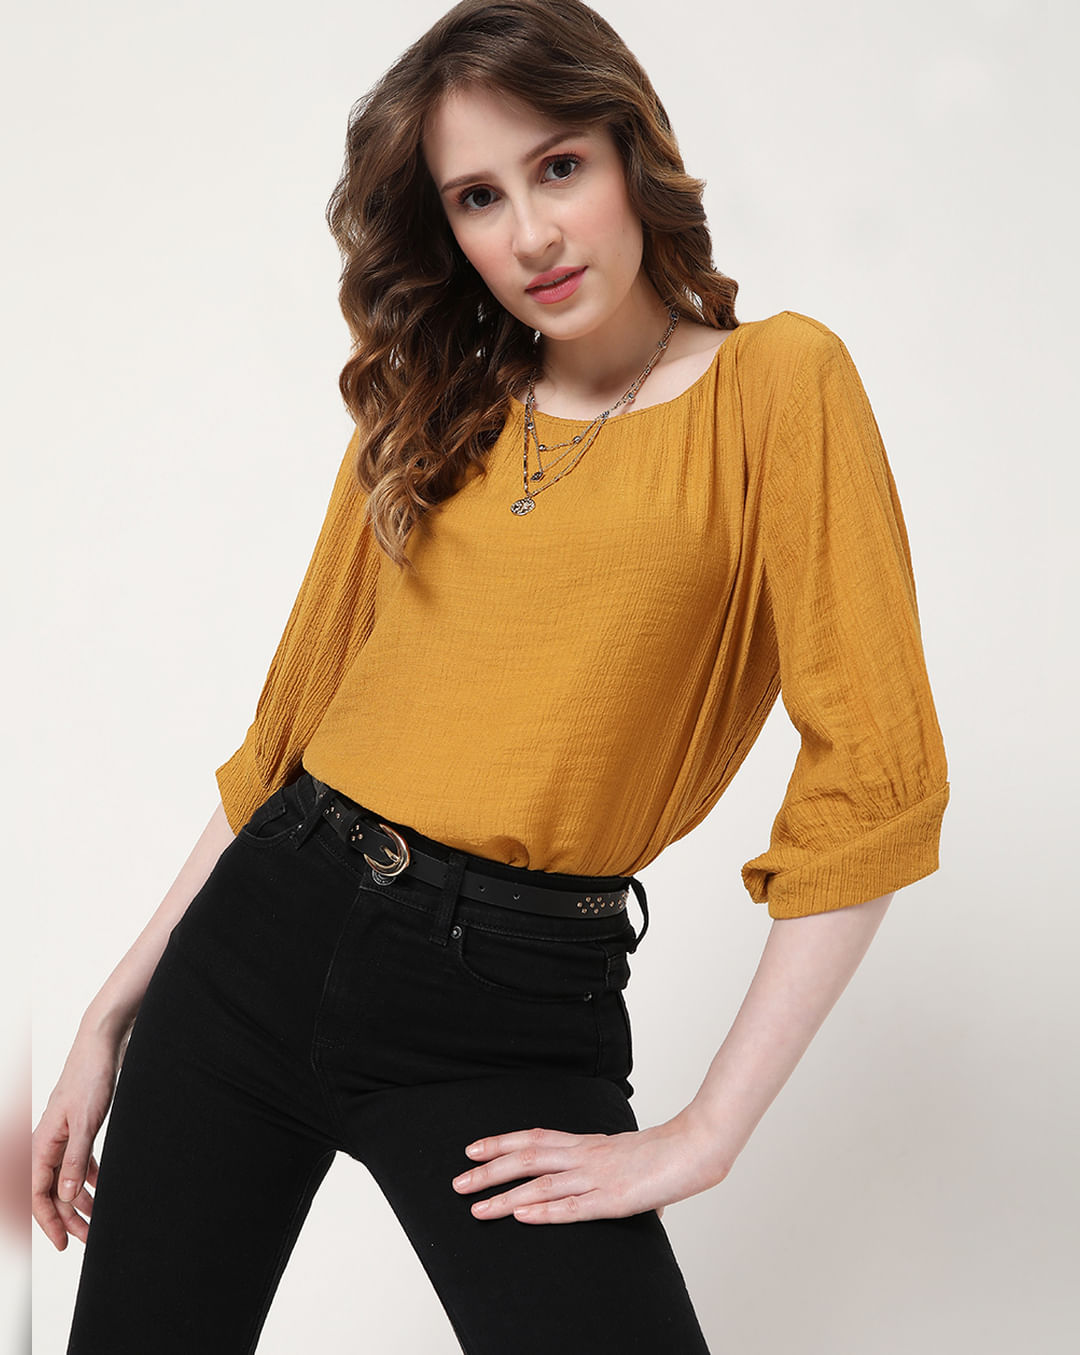 Buy Mustard Textured Top For in India